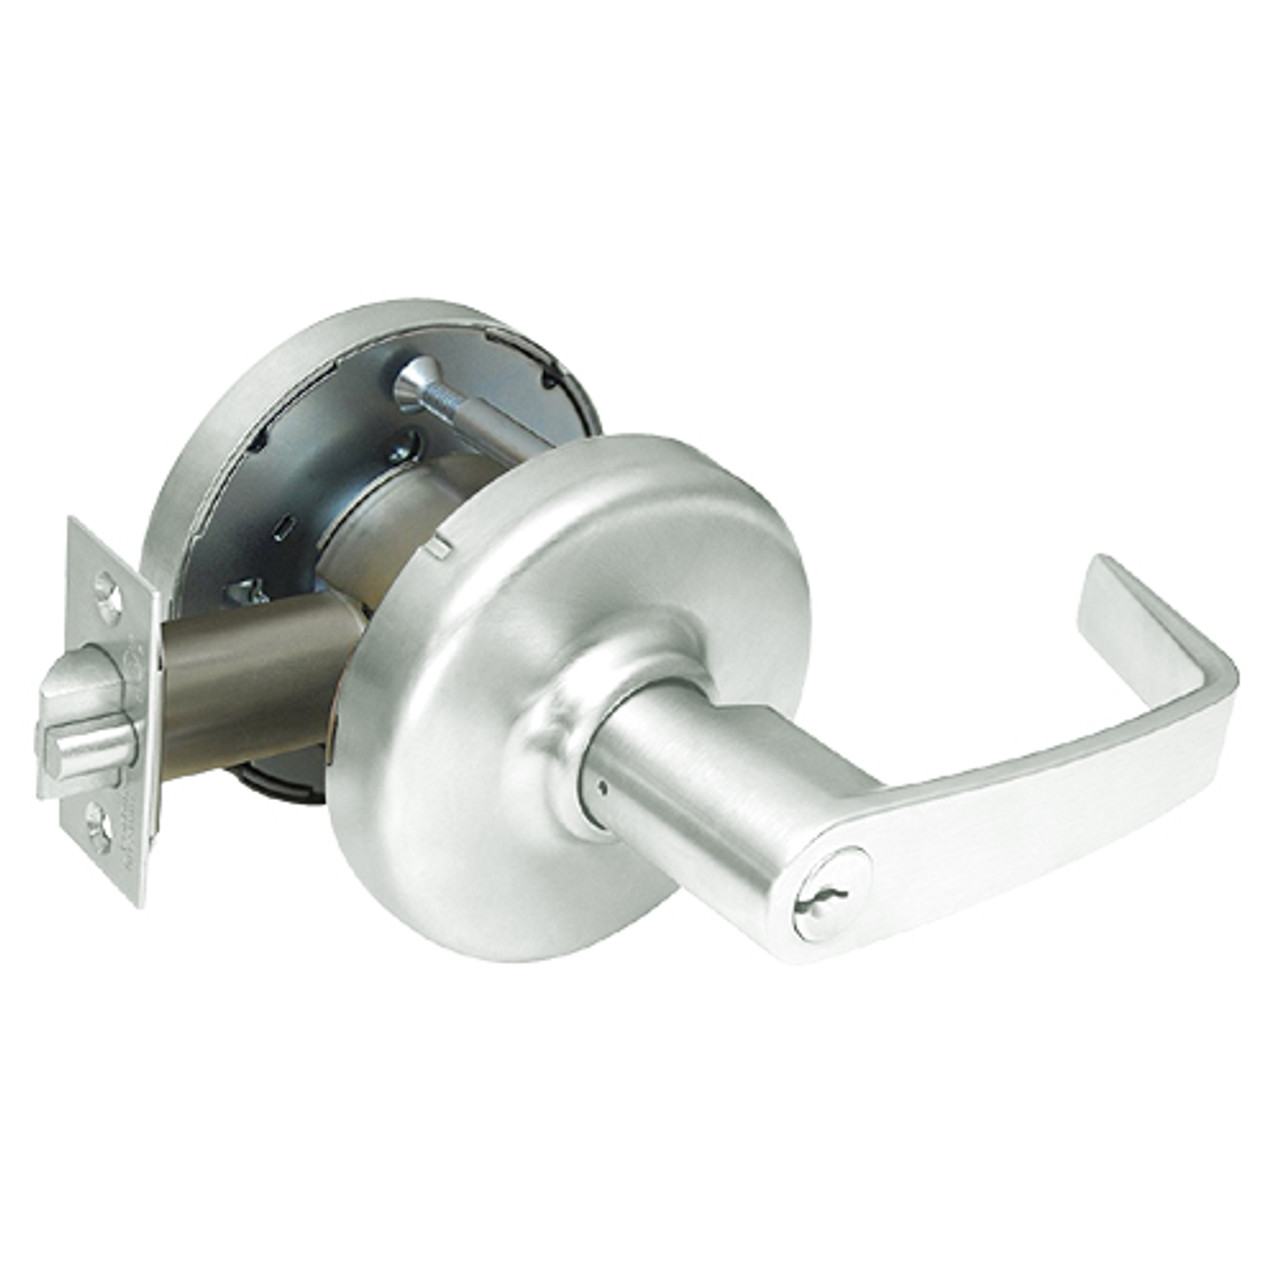 CL3391-NZD-618 Corbin CL3300 Series Extra Heavy Duty Keyed with Turnpiece Cylindrical Locksets with Newport Lever in Bright Nickel Plated Finish